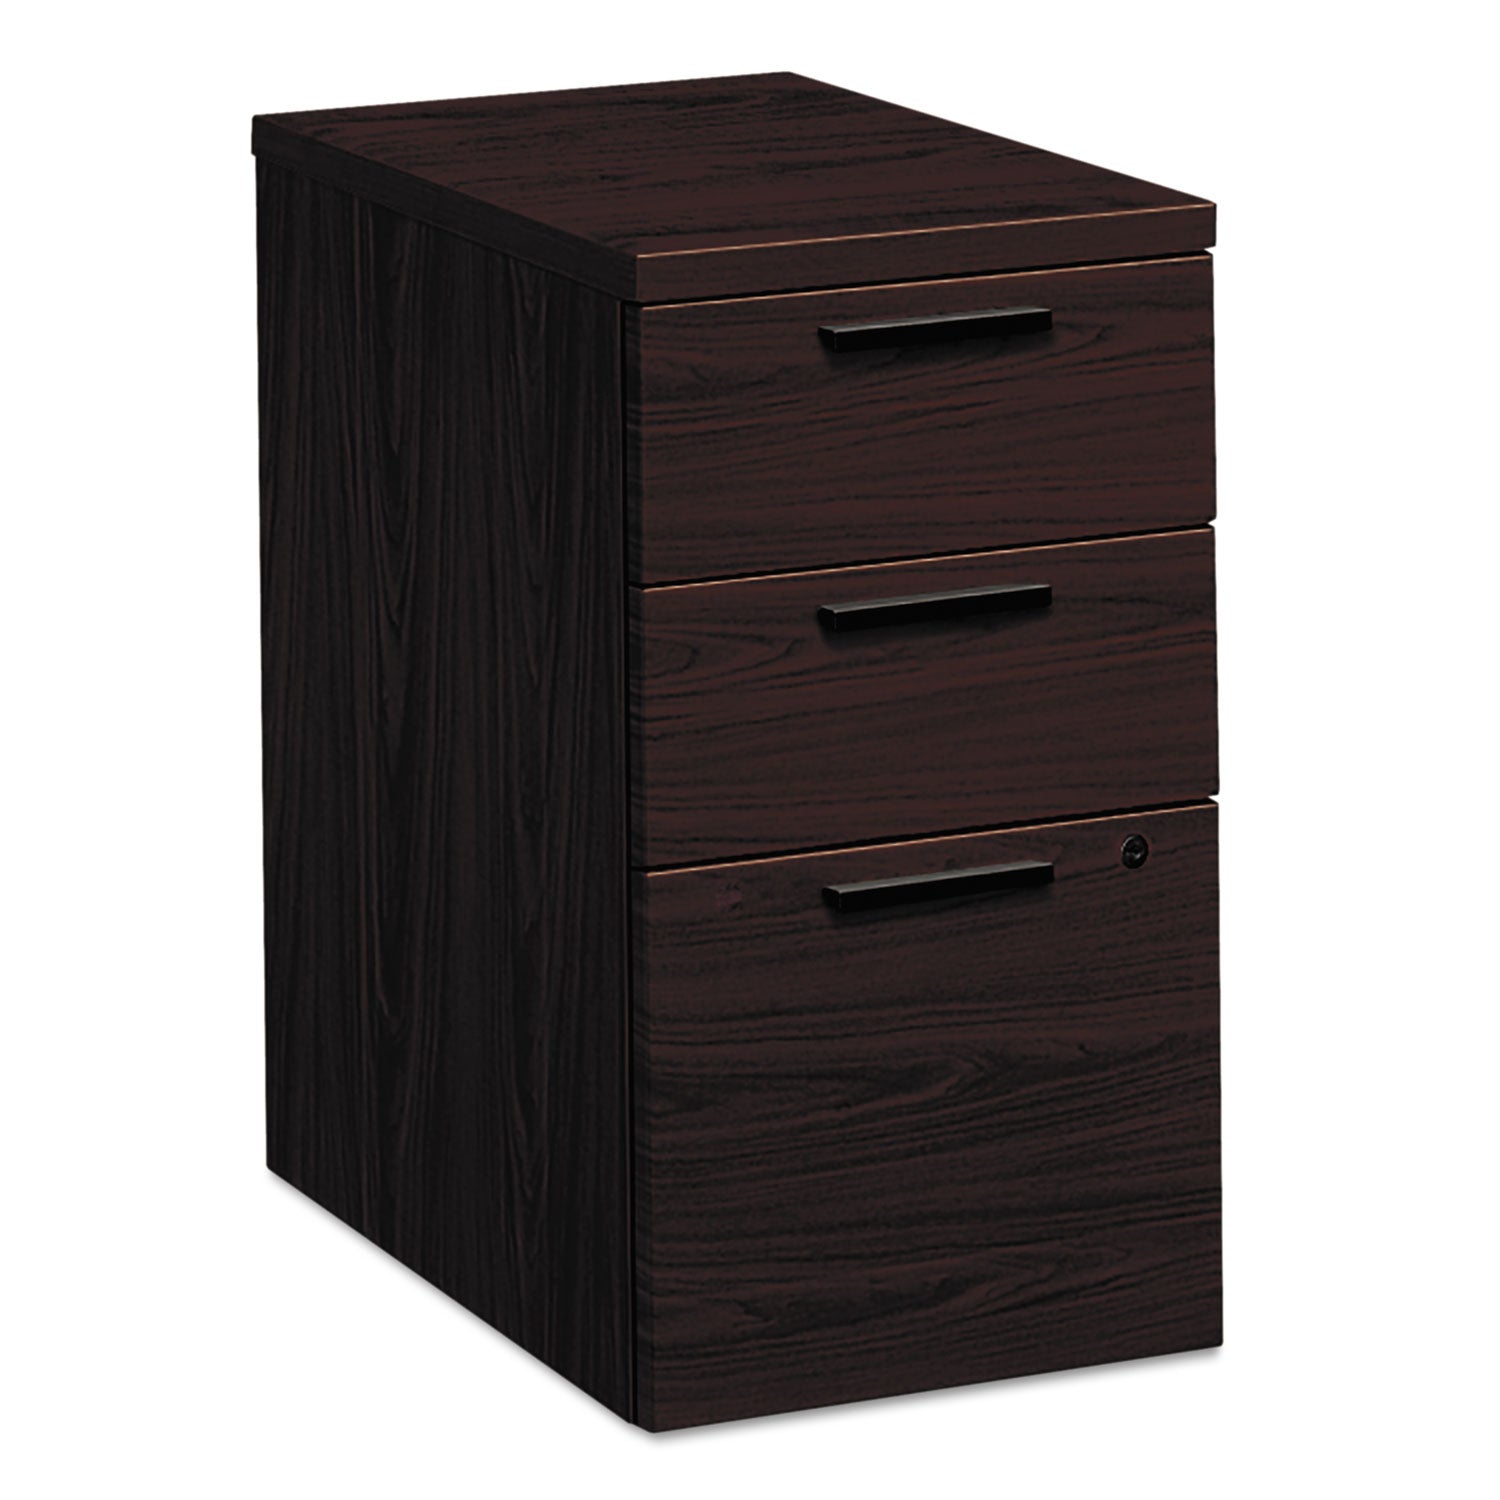 10500 Series Mobile Pedestal File, Left or Right, 3-Drawers: Box/Box/File, Legal/Letter, Mahogany, 15.75" x 22.75" x 28 - 